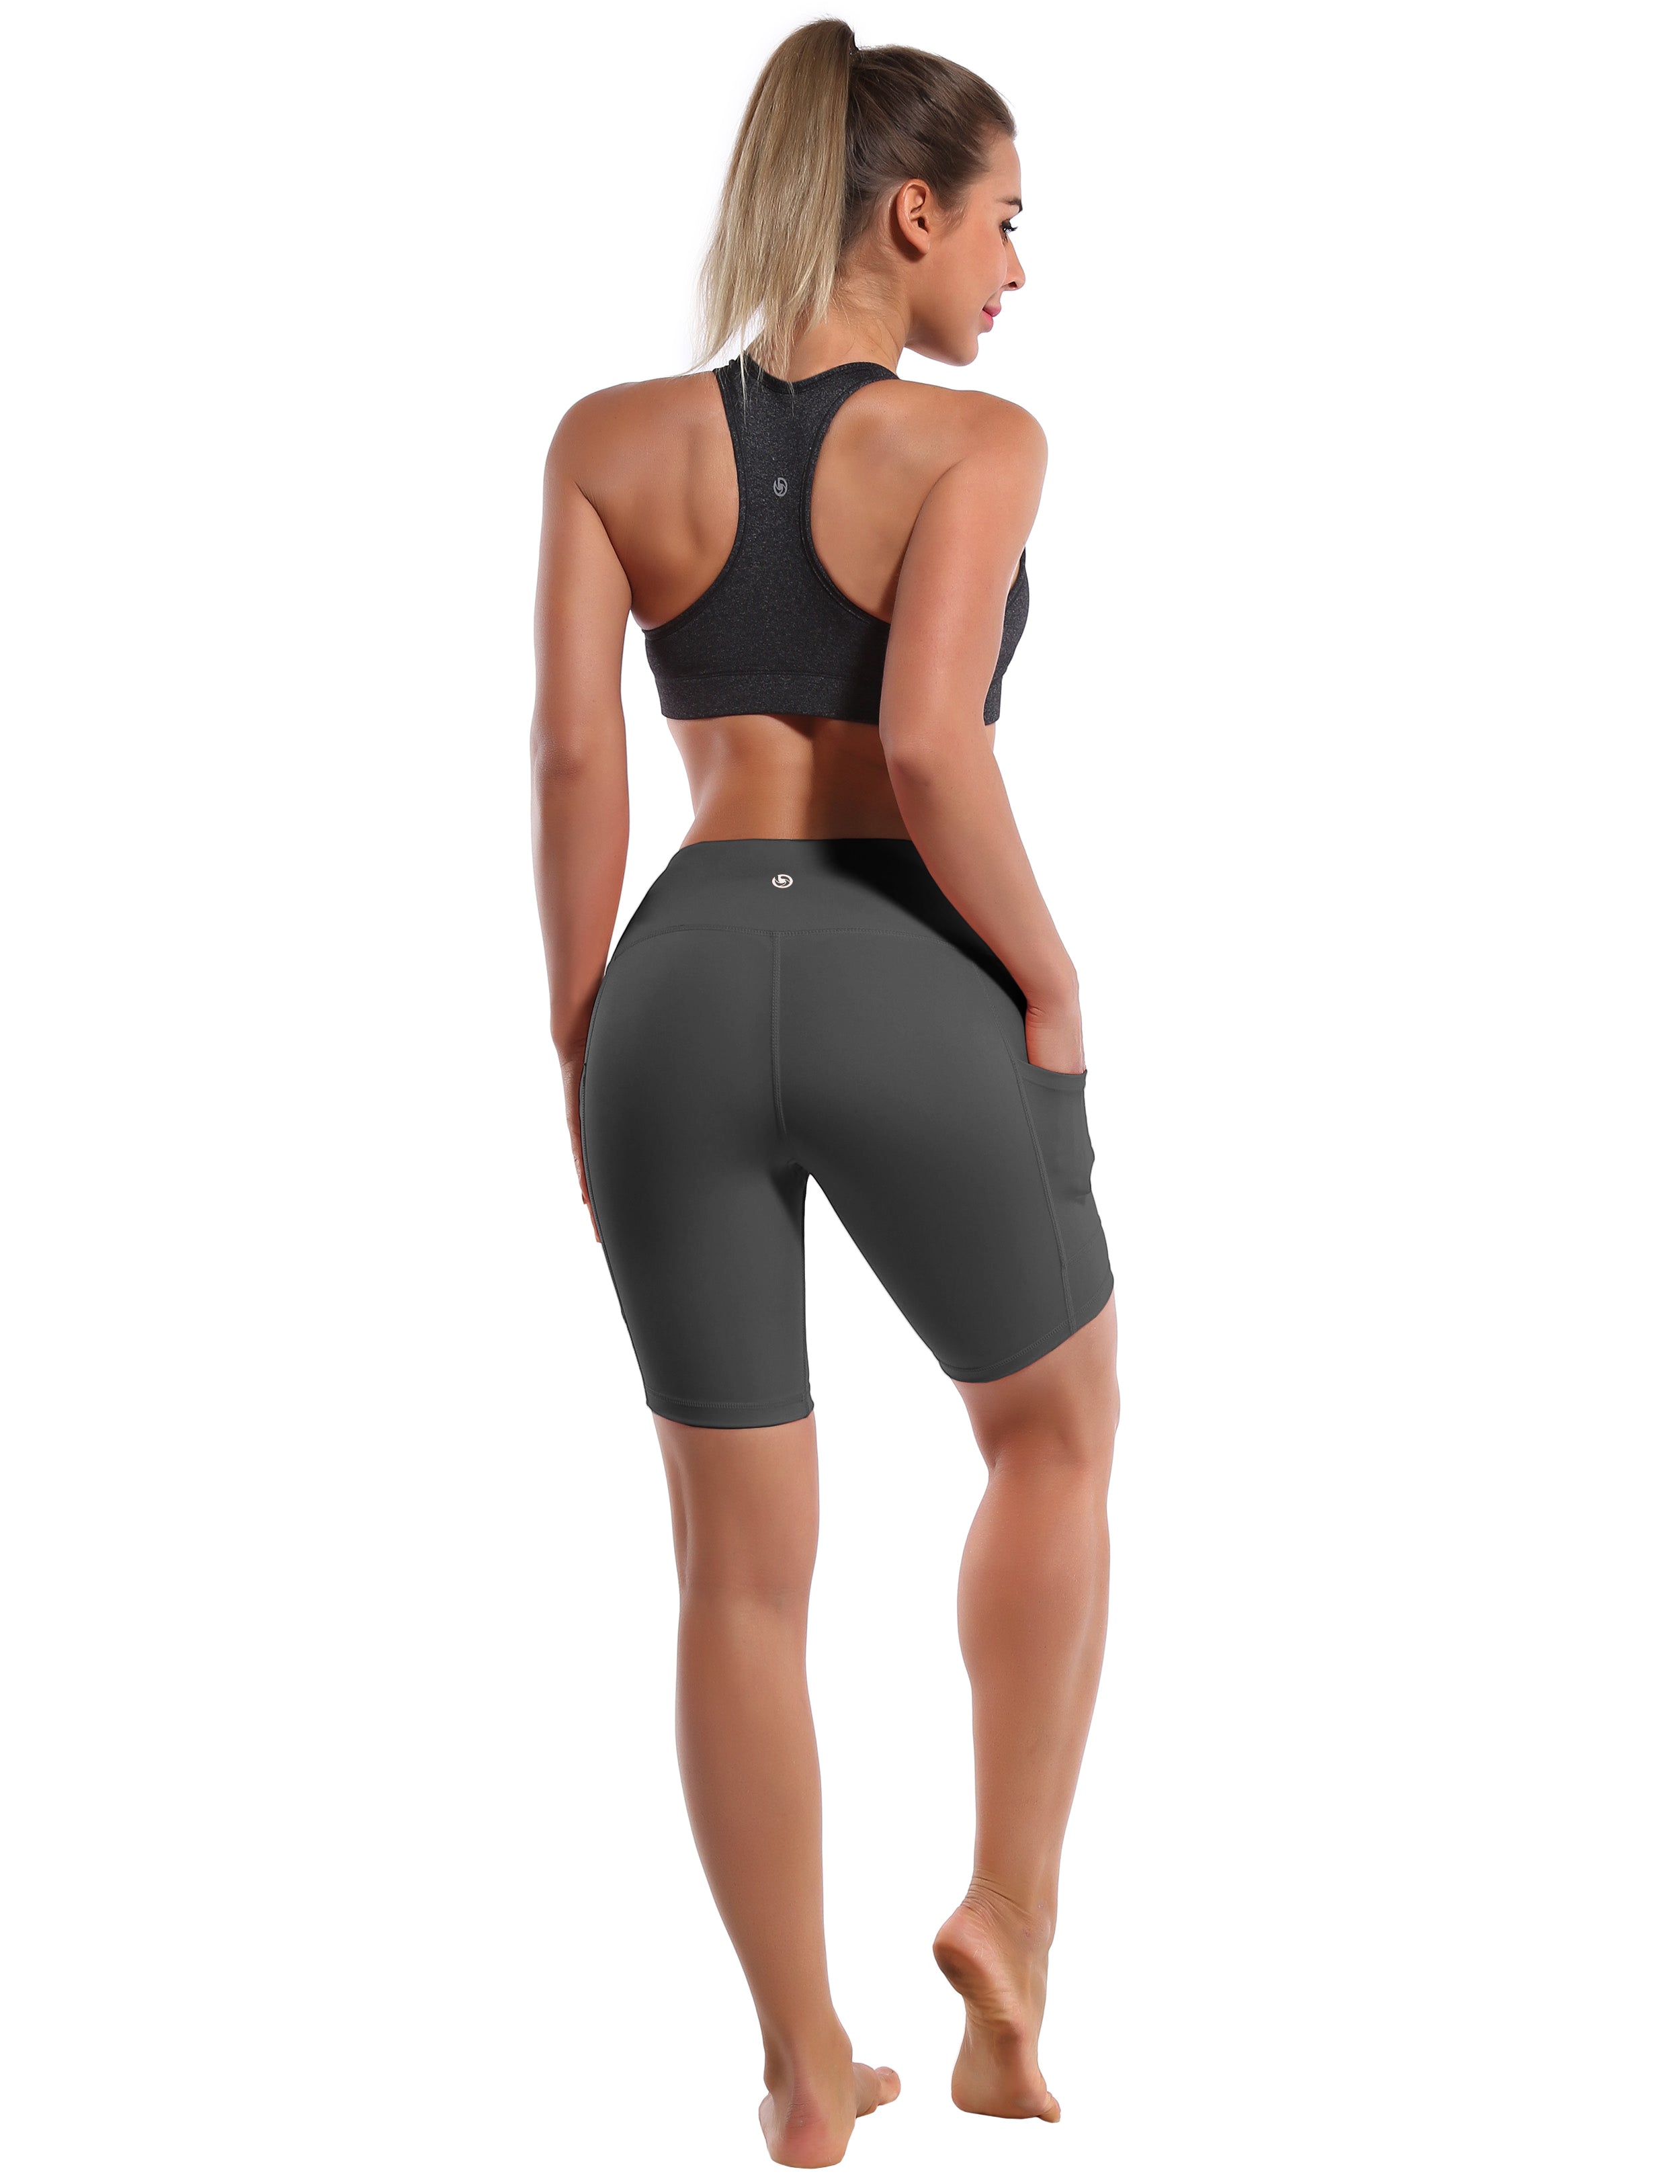 8" Side Pockets yogastudio Shorts shadowcharcoal Sleek, soft, smooth and totally comfortable: our newest style is here. Softest-ever fabric High elasticity High density 4-way stretch Fabric doesn't attract lint easily No see-through Moisture-wicking Machine wash 75% Nylon, 25% Spandex